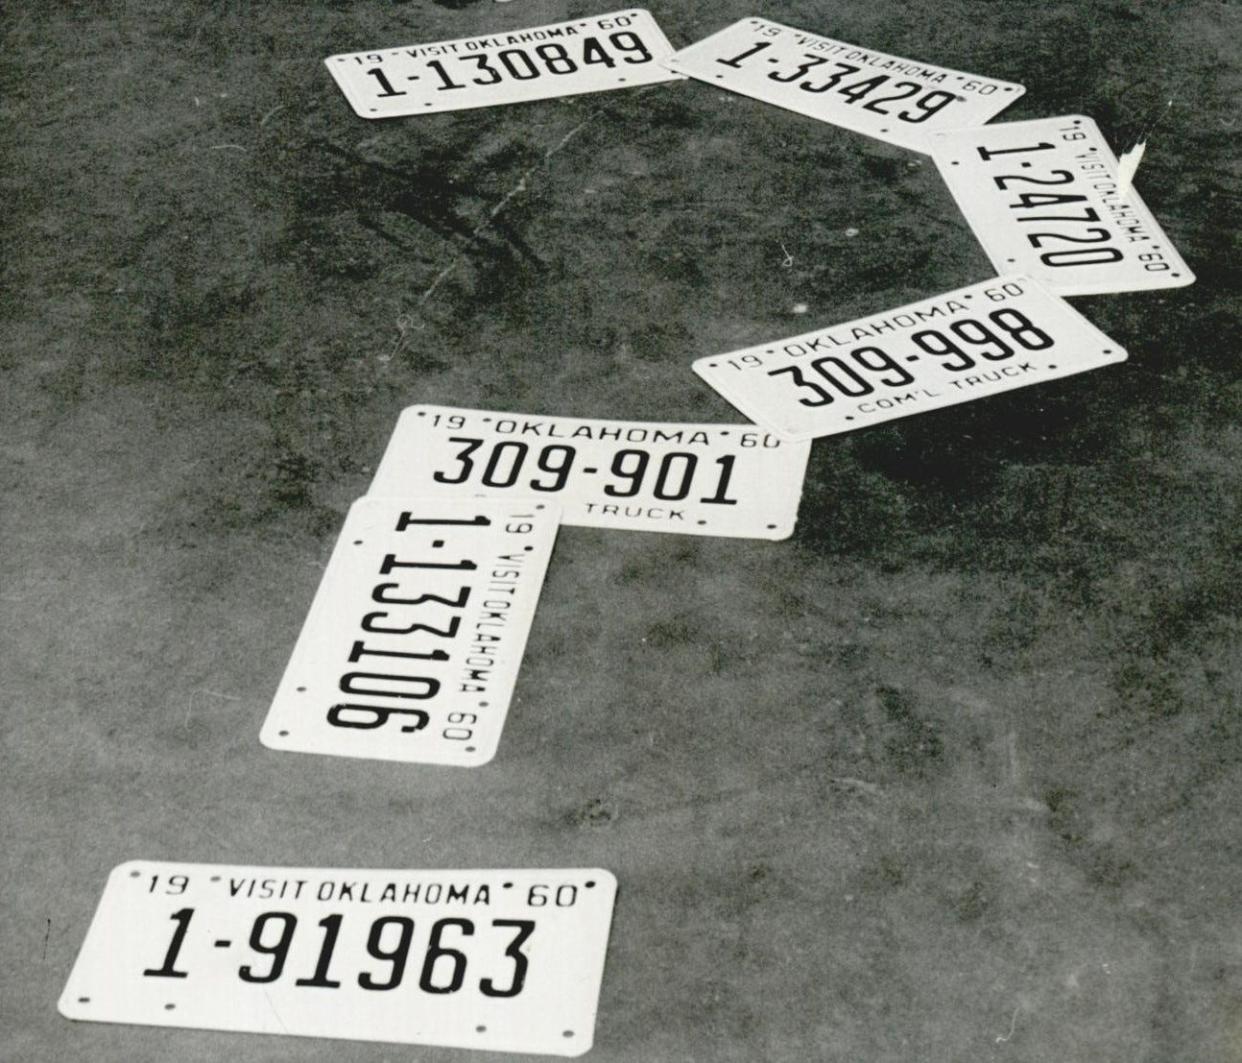 Inquisitive about license plates? A journalist in 1923 reported only three out of 10 motorists could recite their tag numbers from memory. In this 1960 photograph, auto tags were used to create a question mark after an Oklahoma County tag agent discovered there were seven duplicated tags among 160,000 license plates made for Oklahoma County by prisoners.